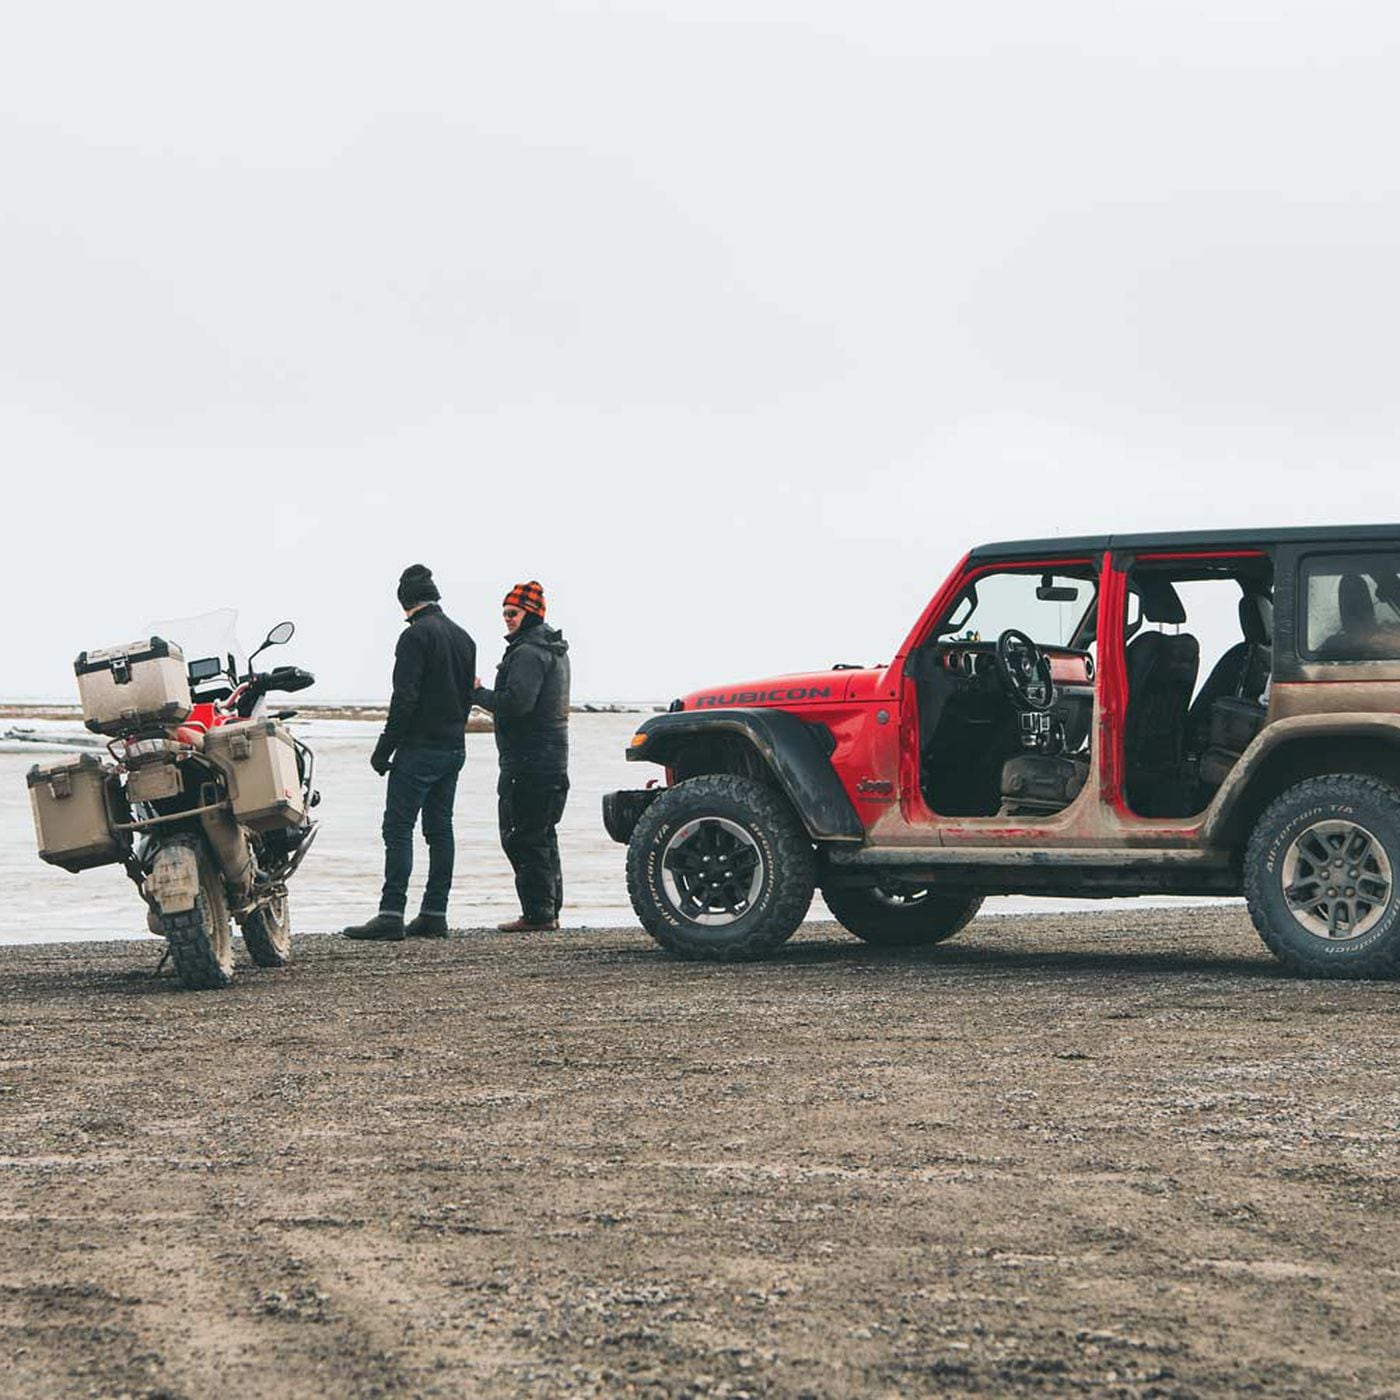 The Doorless-Jeep Experiment | Cycle World